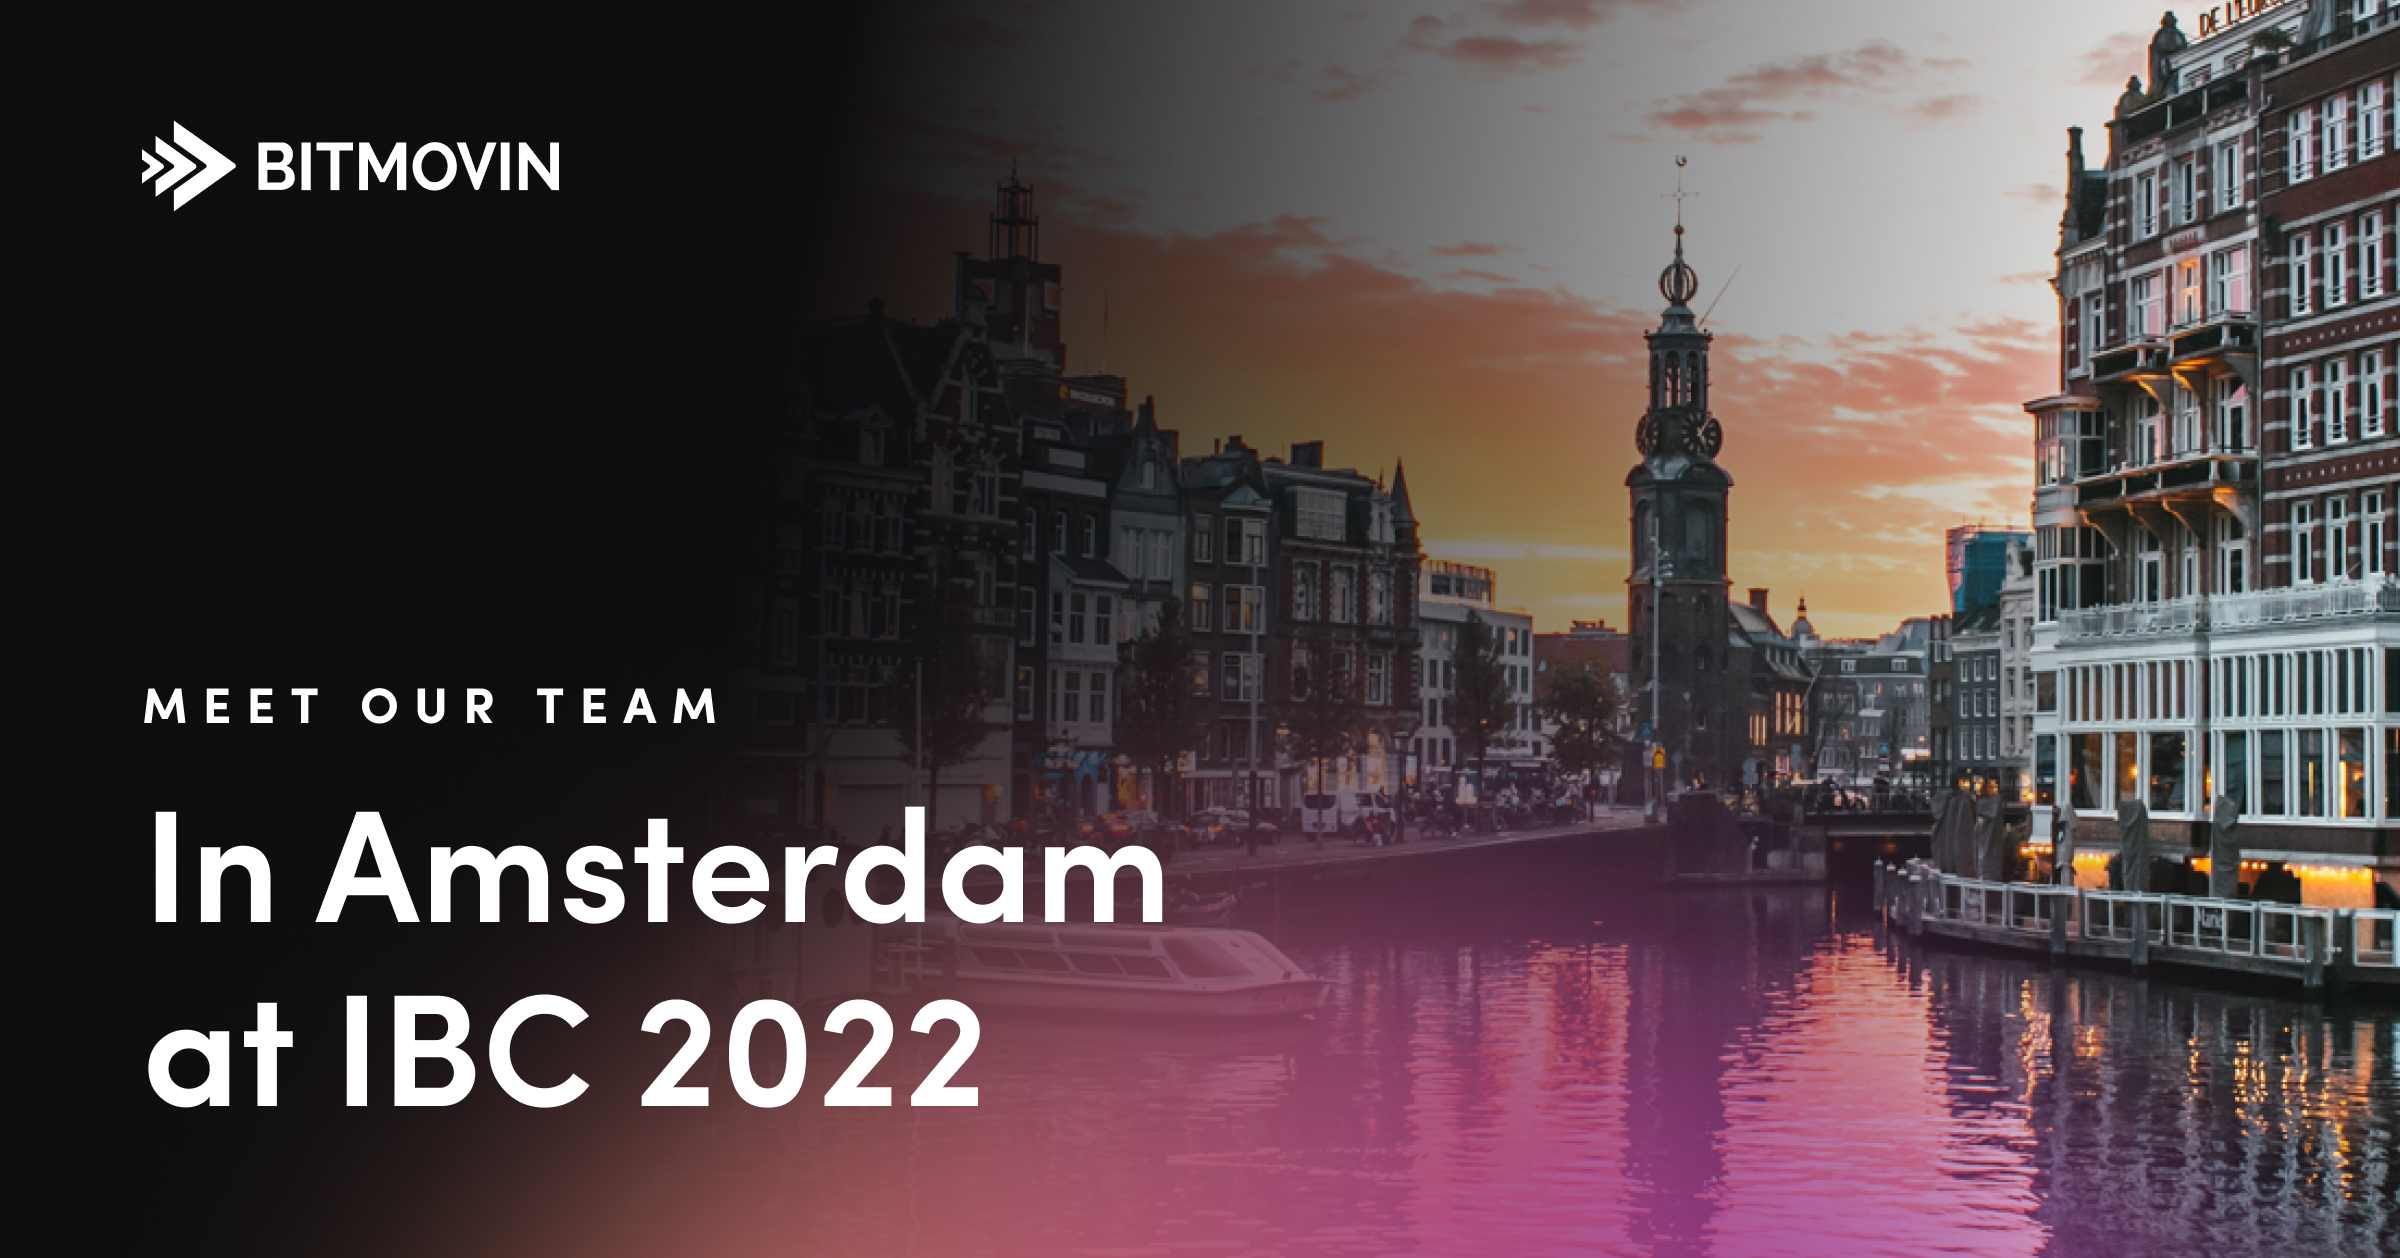 Meet our team in Amsterdam at IBC 2022